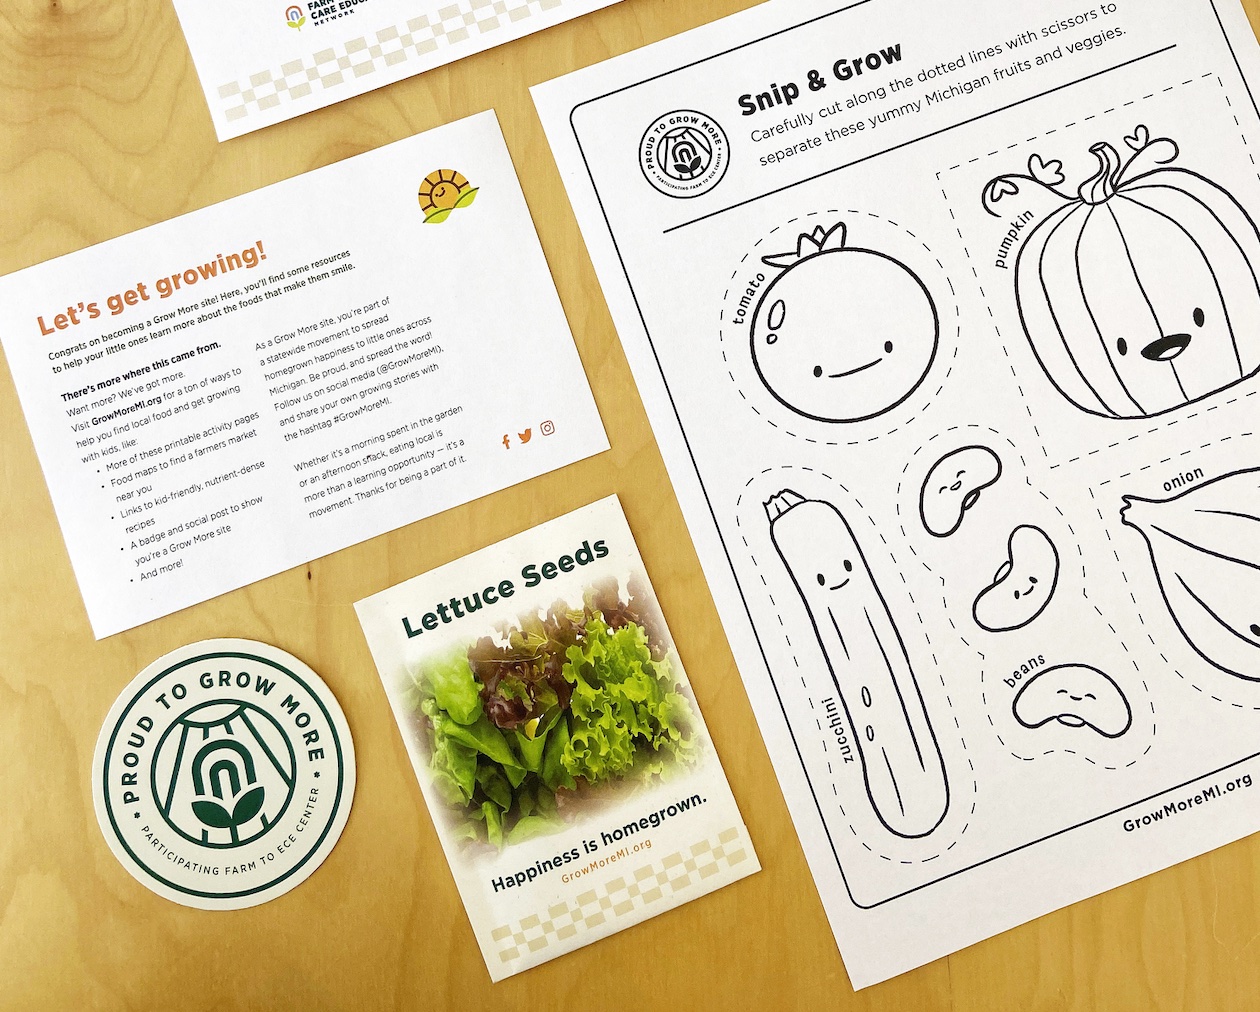 A tabletop display of activity sheets, a Grow More sticker, and a lettuce seed packer.